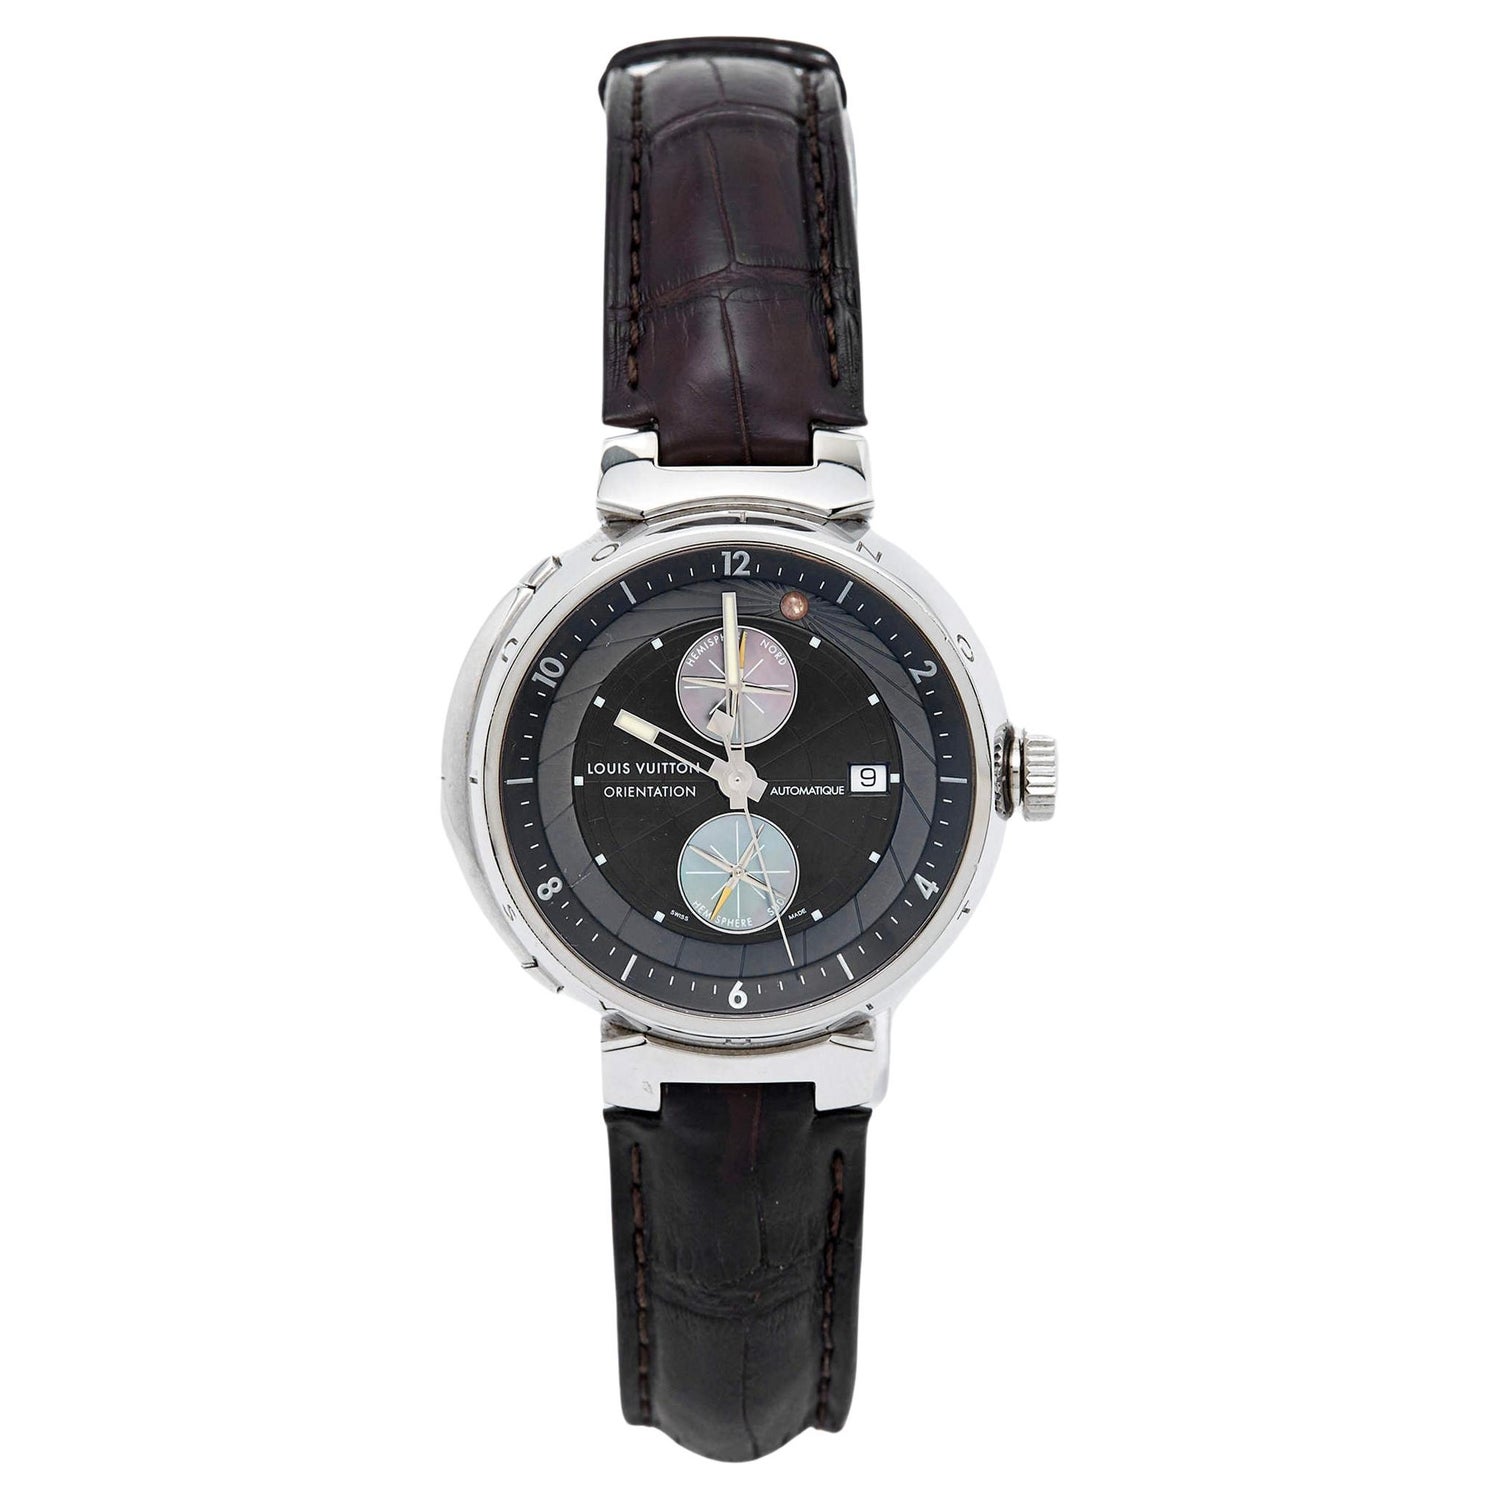 Louis Vuitton Tambour Chronograph LV277 for $3,750 for sale from a